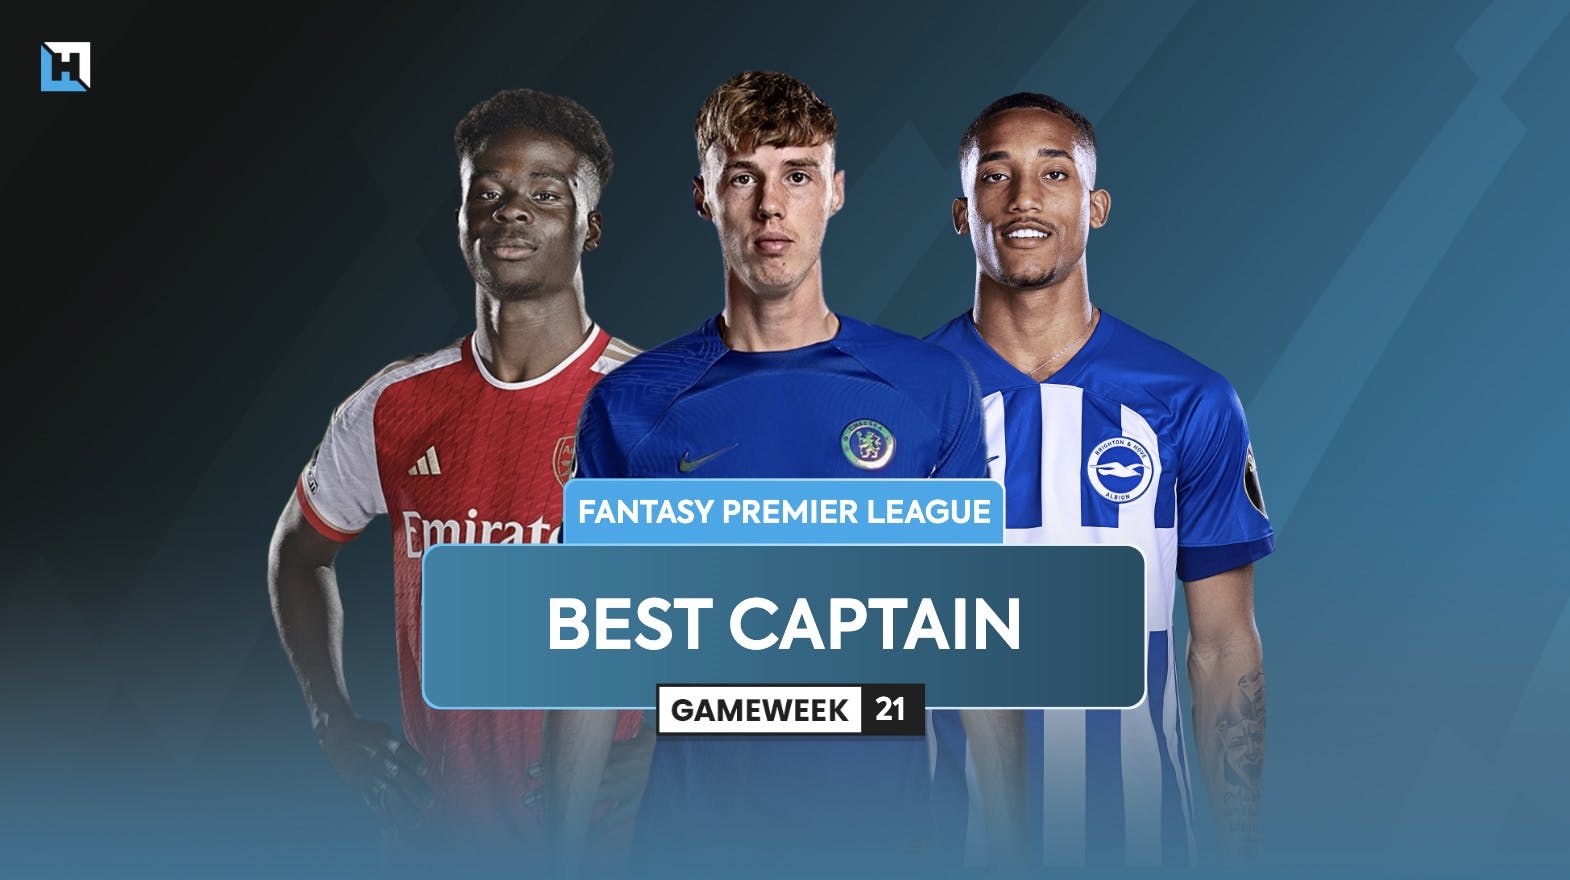 Who is the best FPL captain for Gameweek 21?